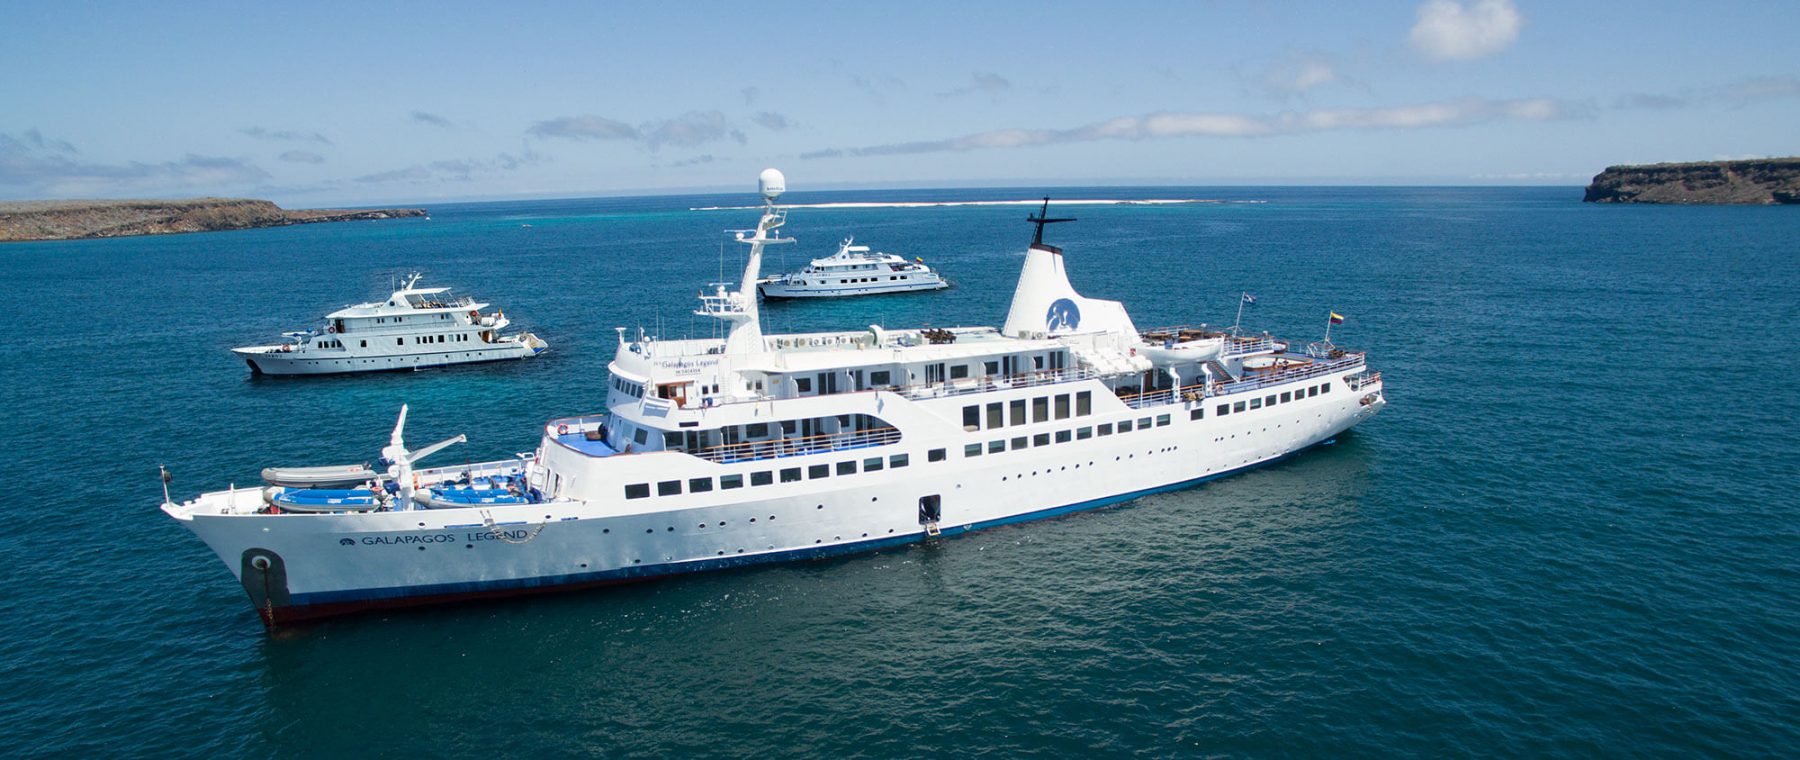 Our Galapagos Cruise Vessels are the charm of the islands.